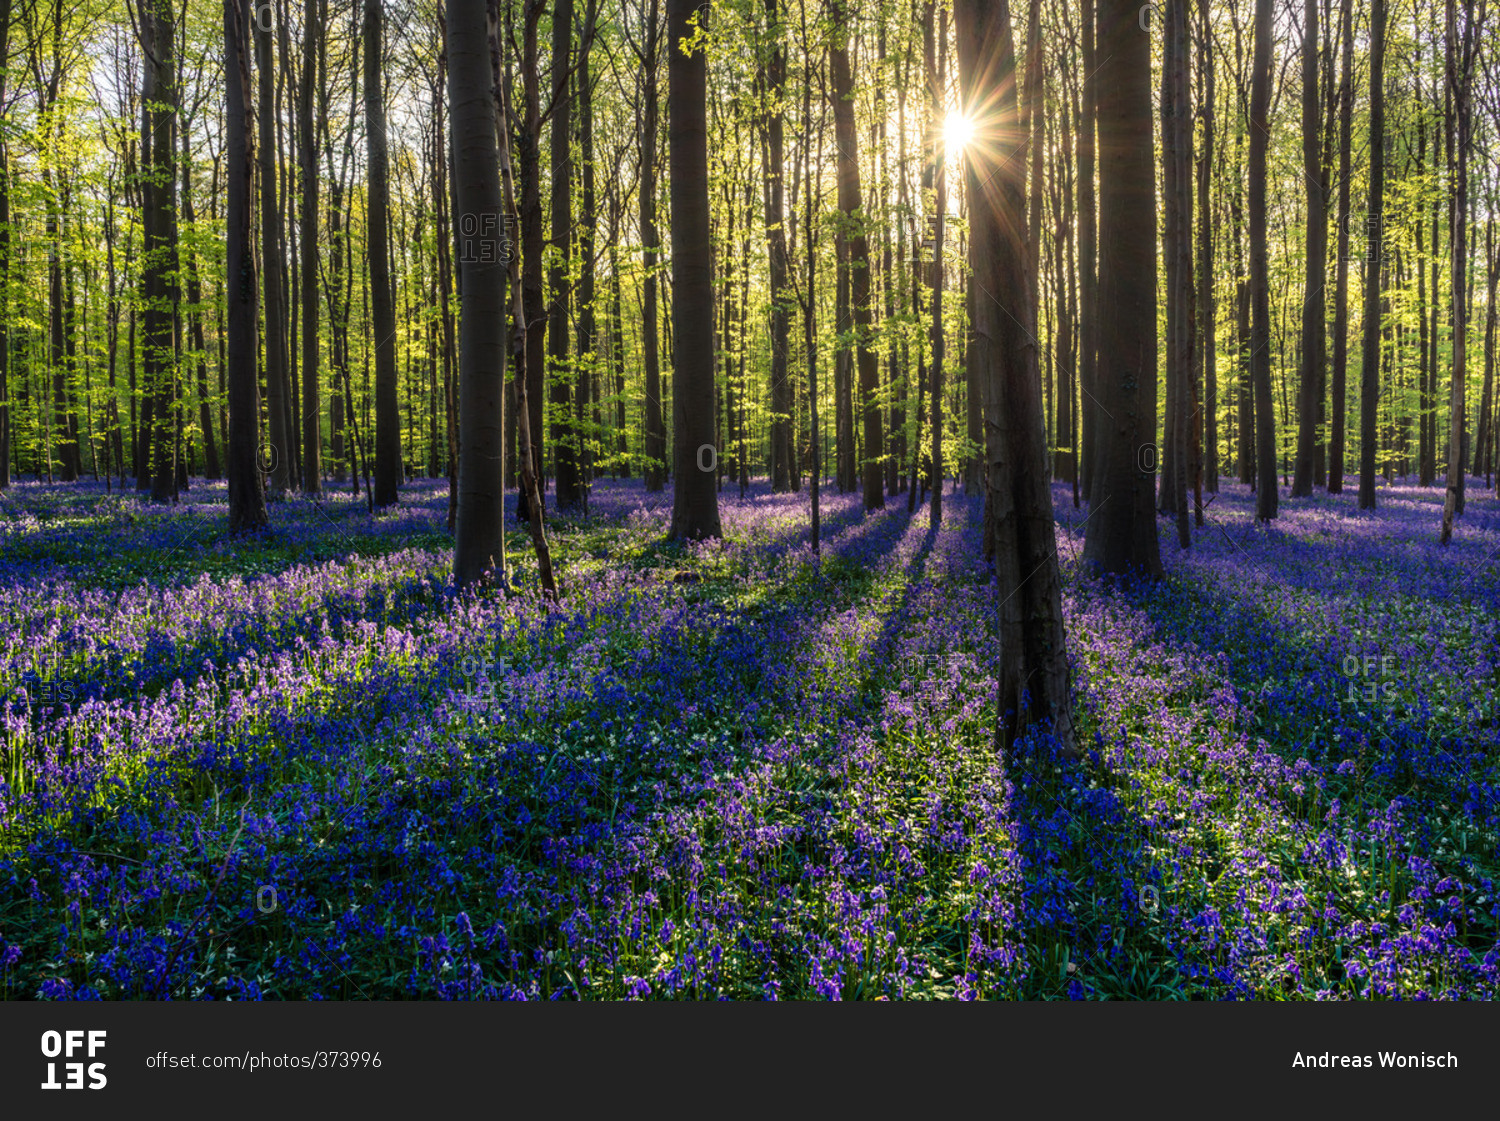 Sun shining through the trees above a field of wildflowers in the Hallerbos Forest in Belgium